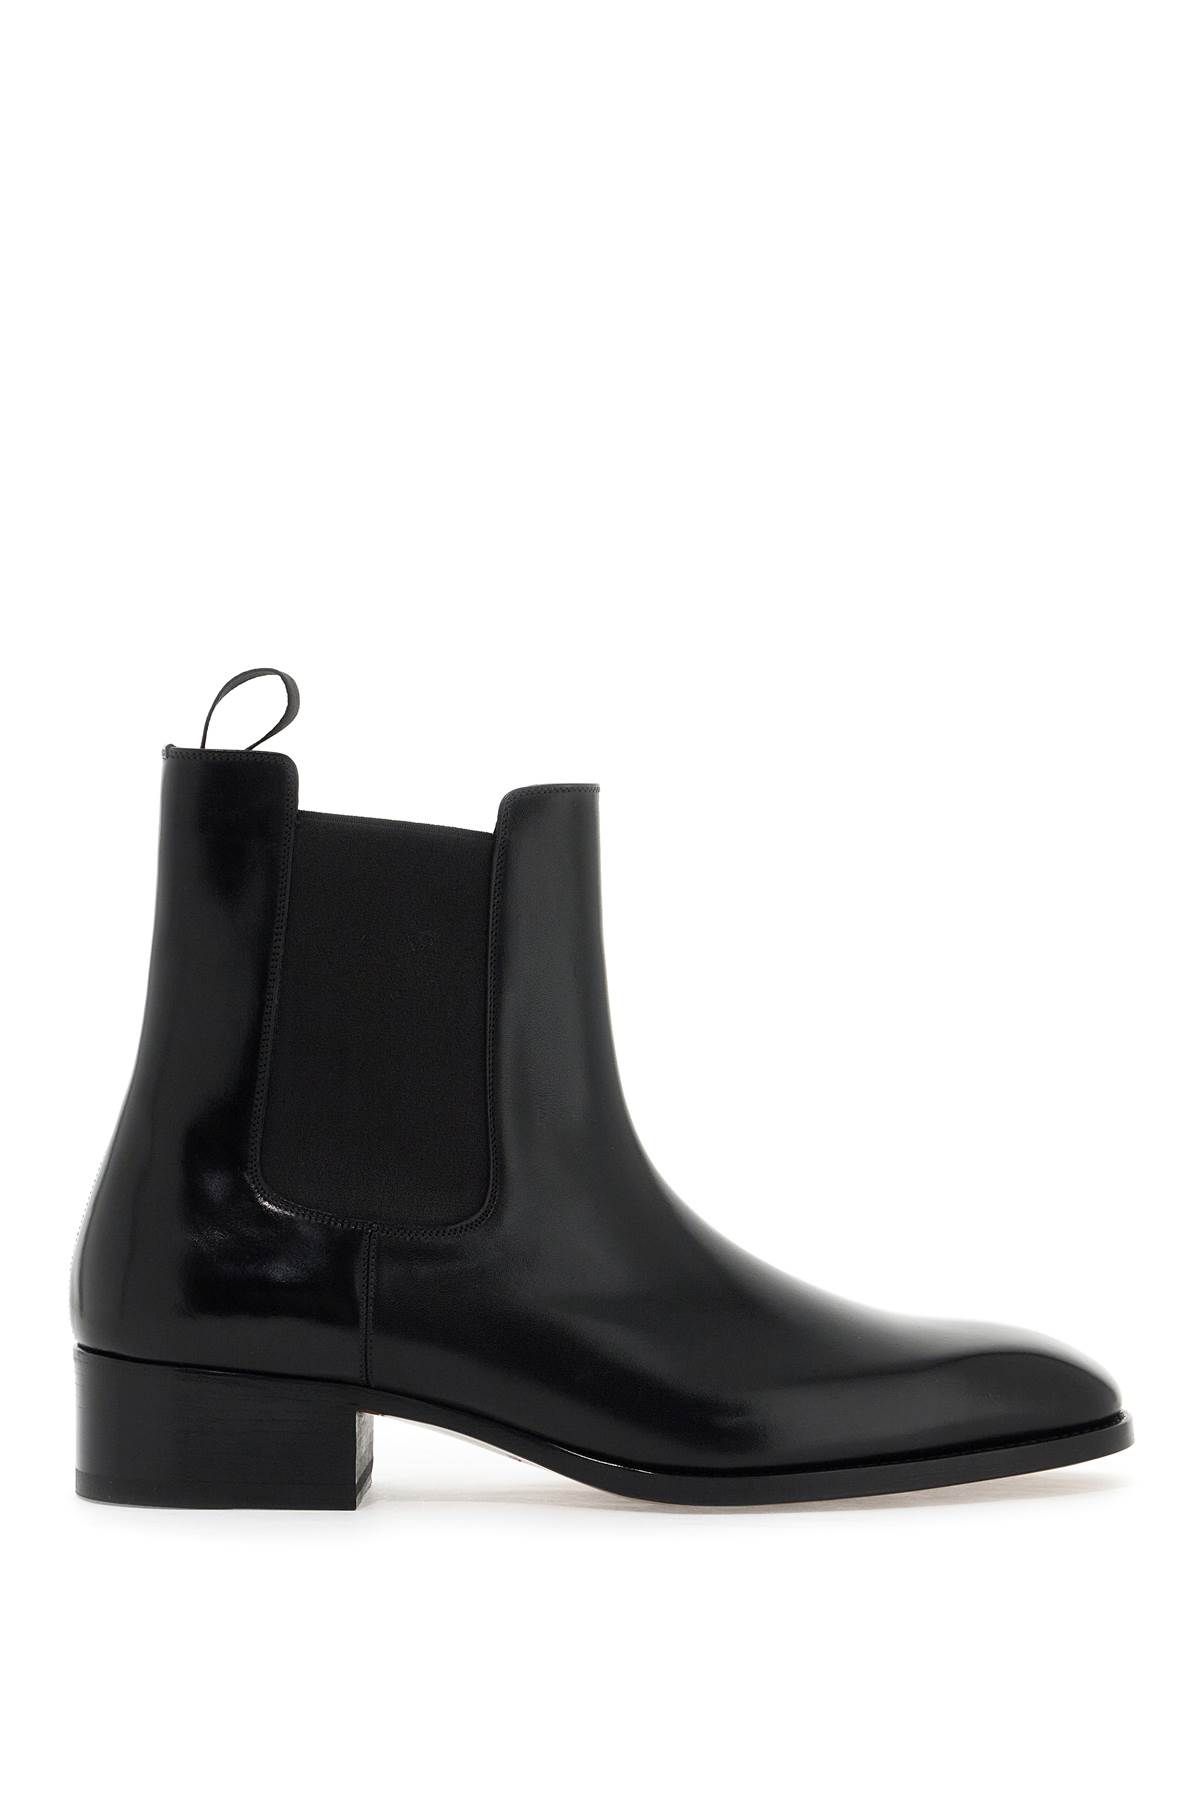 Tom Ford TOM FORD leather chelsea ankle boots